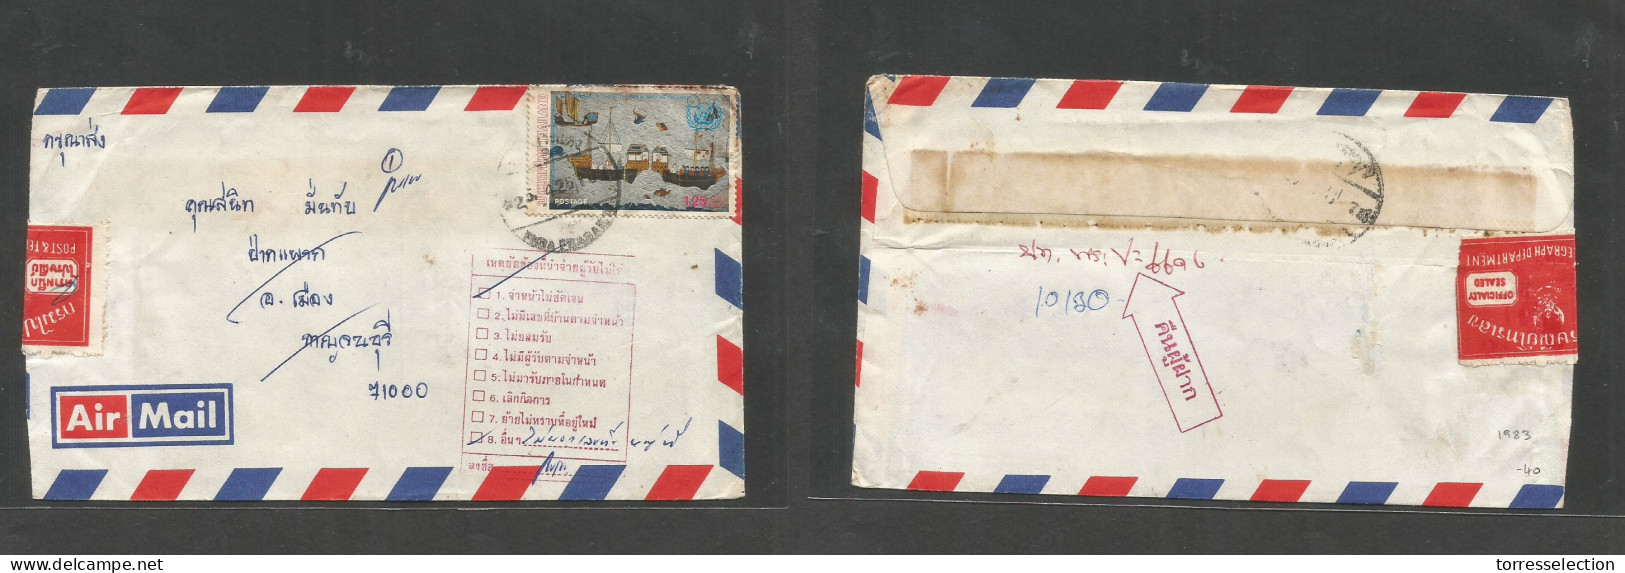 SIAM. 1983 (25 Apr) BKK. Local Fkd Envelope, Resealed By Post Office With Red Label + Aux Cachet. Scarce And Fine. SALE. - Siam